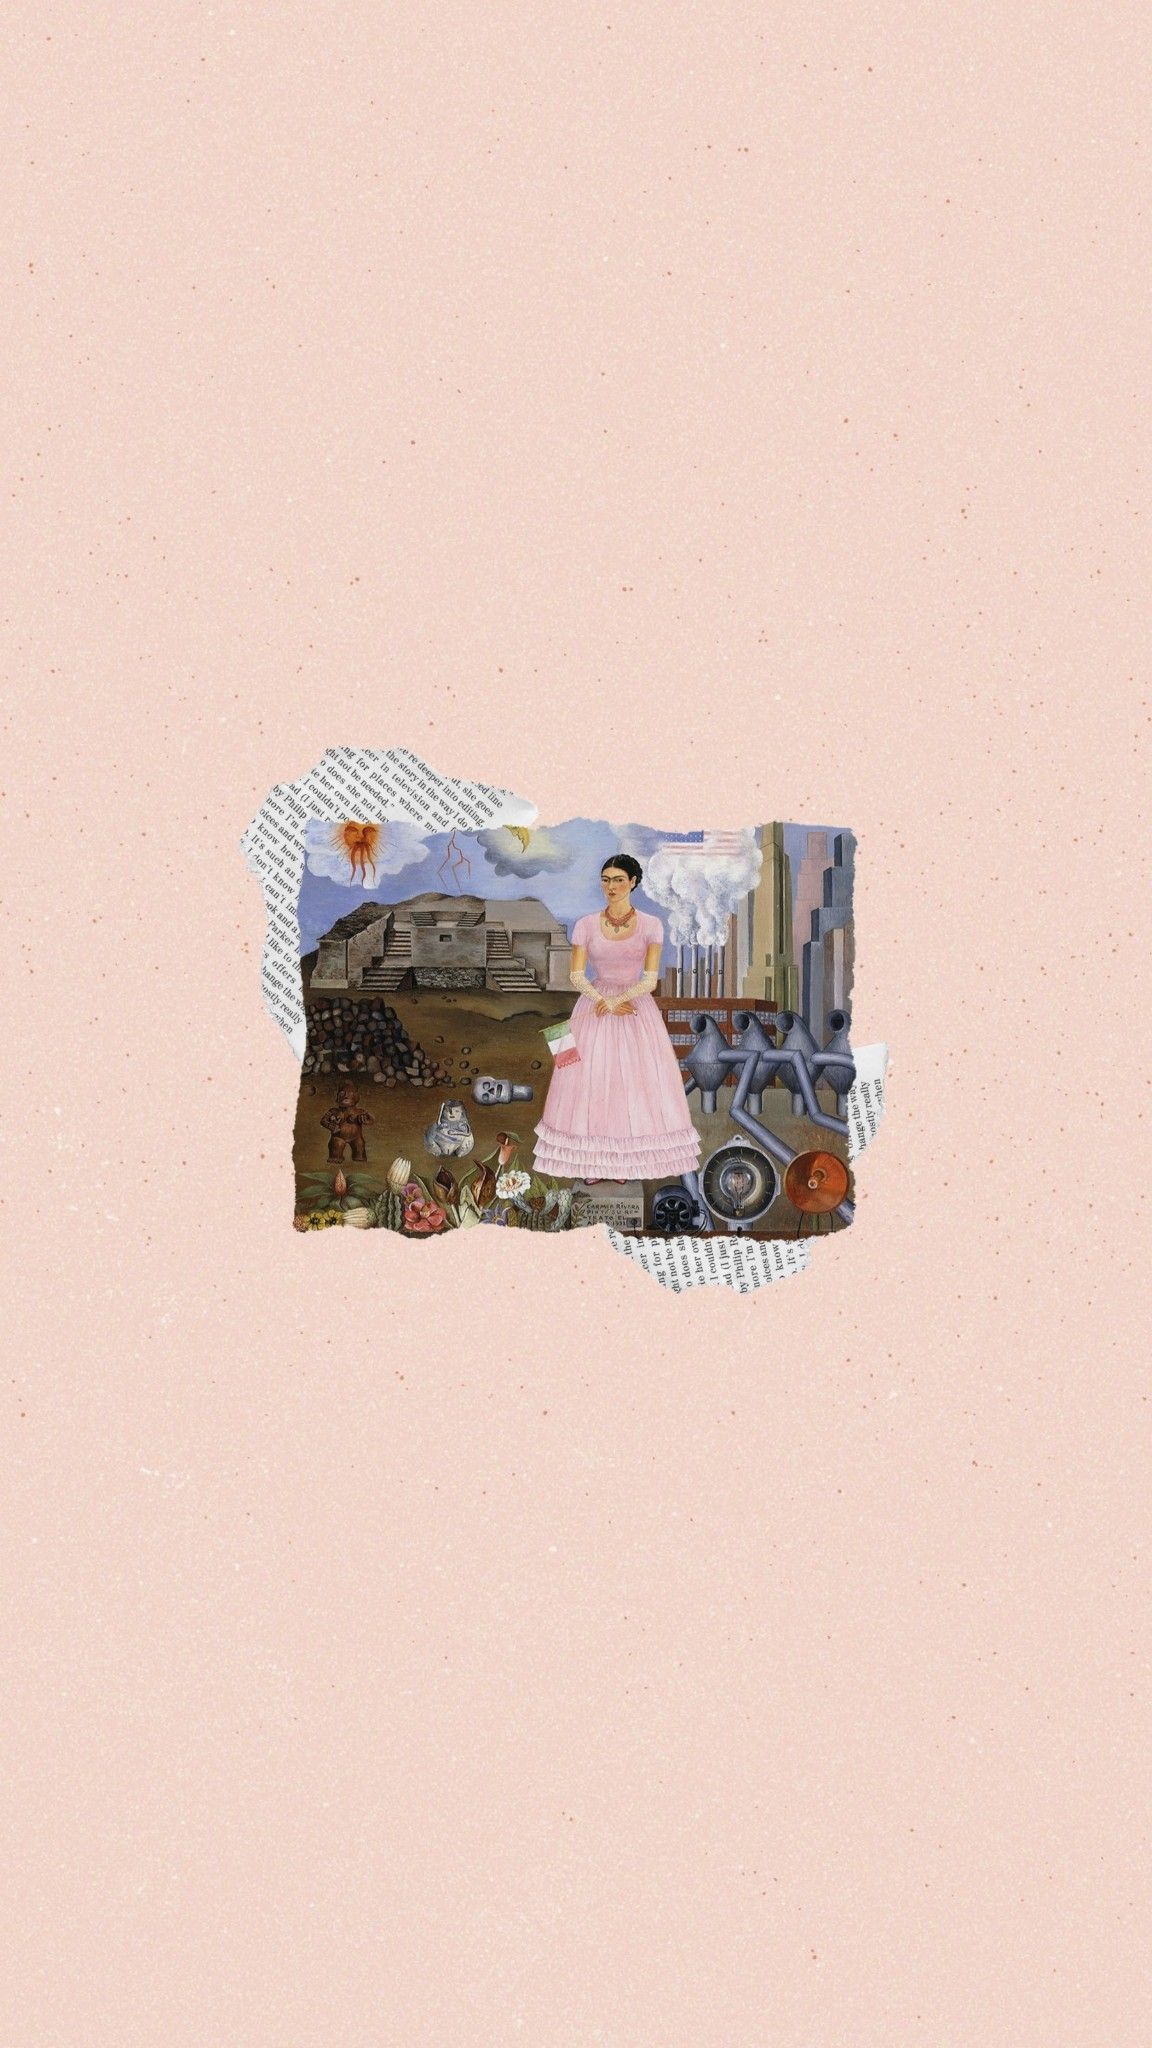 A collage of a woman in a pink dress with a bird flying above her. - Frida Kahlo